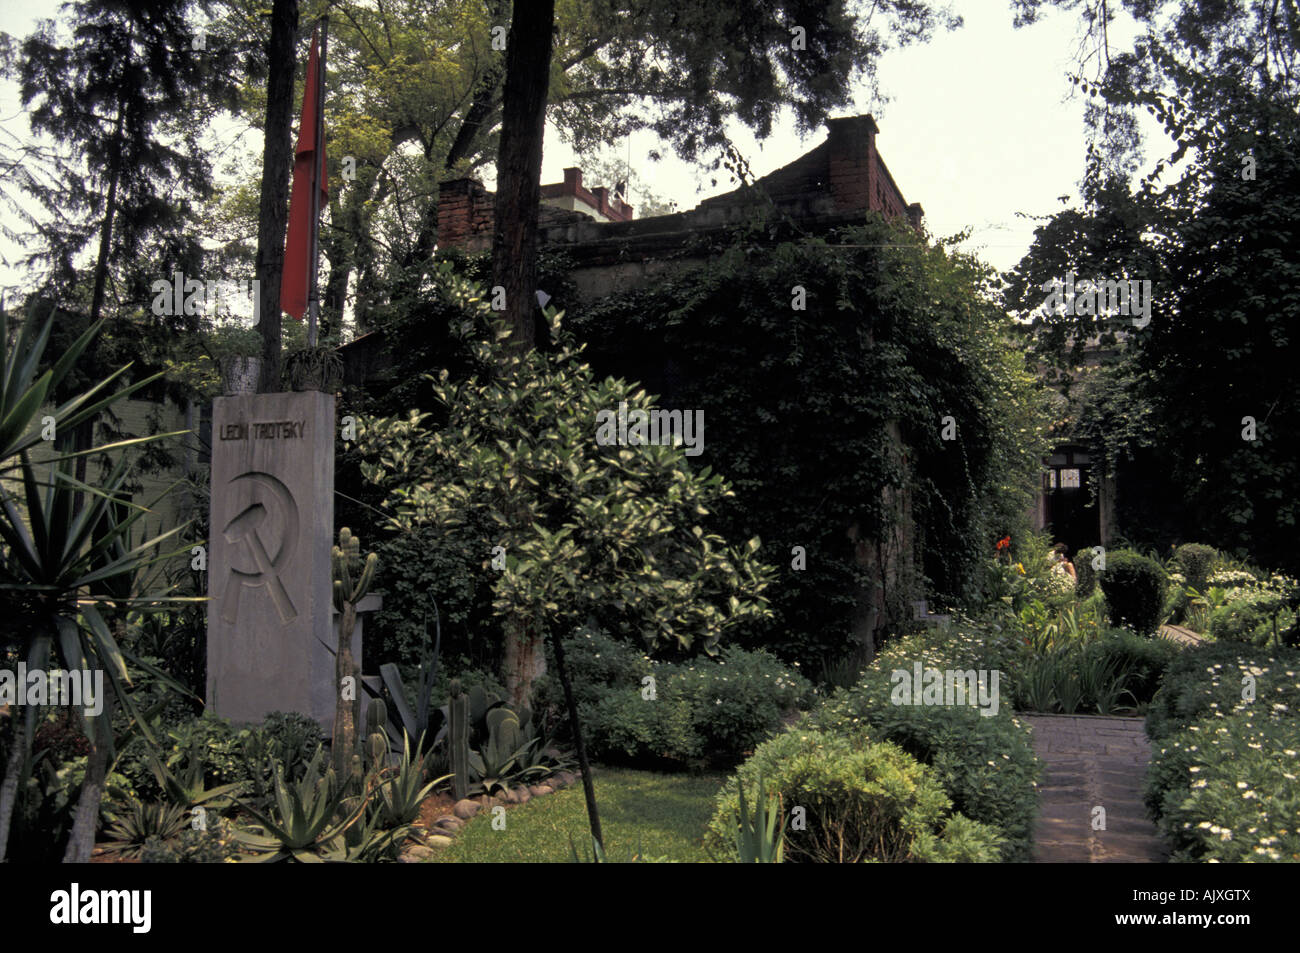 Leon Trotsky's tomb in the garden of the Leon Trotsky Hose Museum in Coyoacan, Mexico City Stock Photo